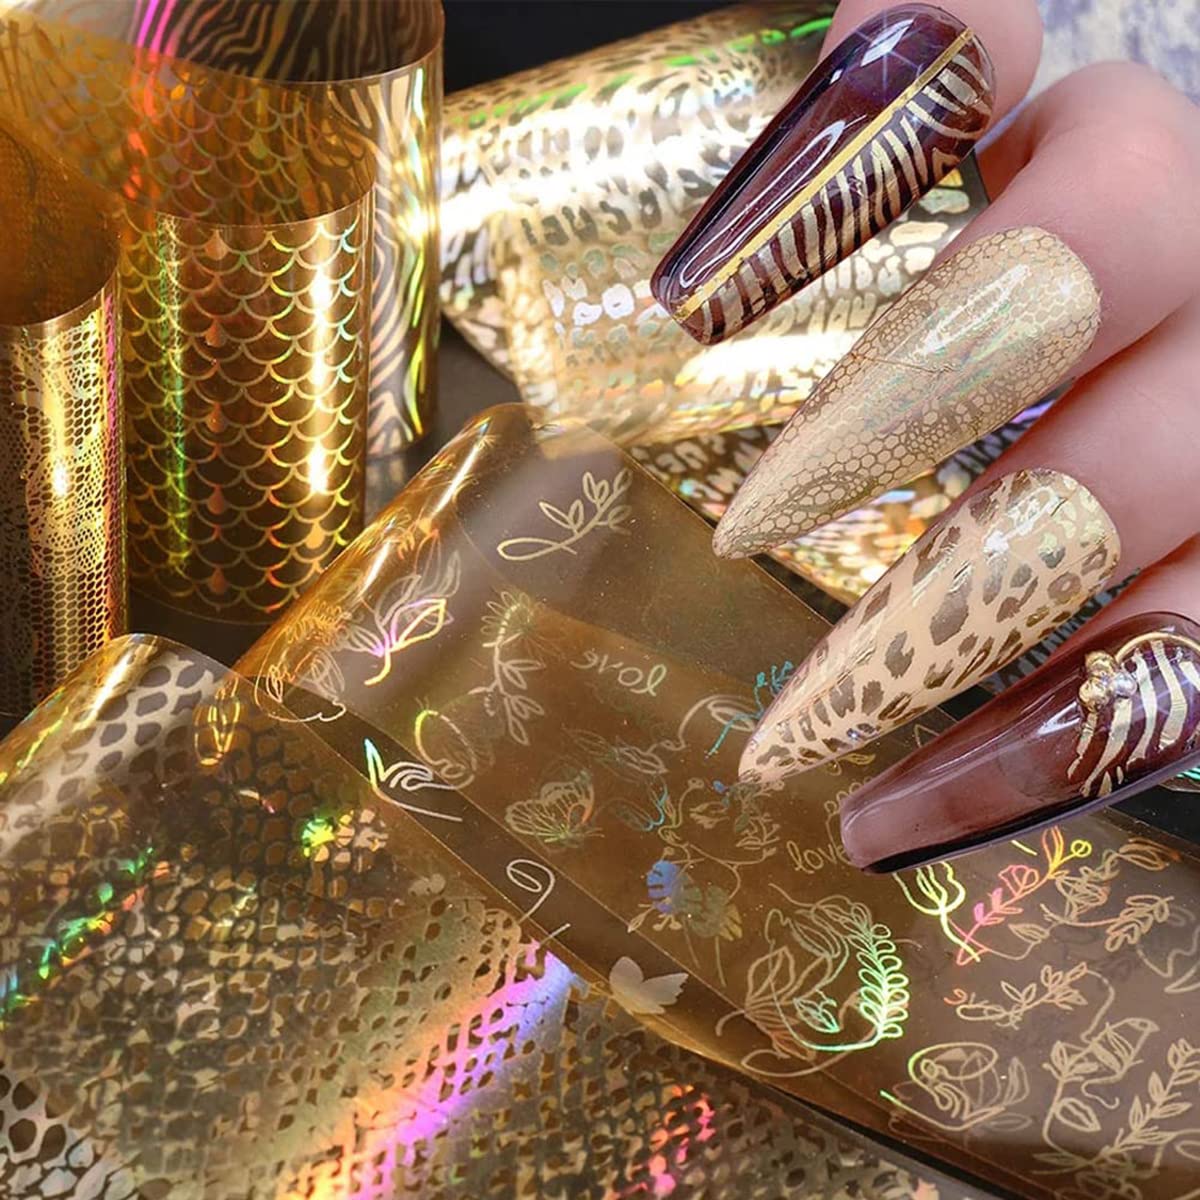 1 Lage Sheet Gold Shiny Nail Stickers Luxury Nail Salon Design Chic 3D Nail  Art Stickers Decals Self-Adhesive Manicure for Nails Decoration (004)